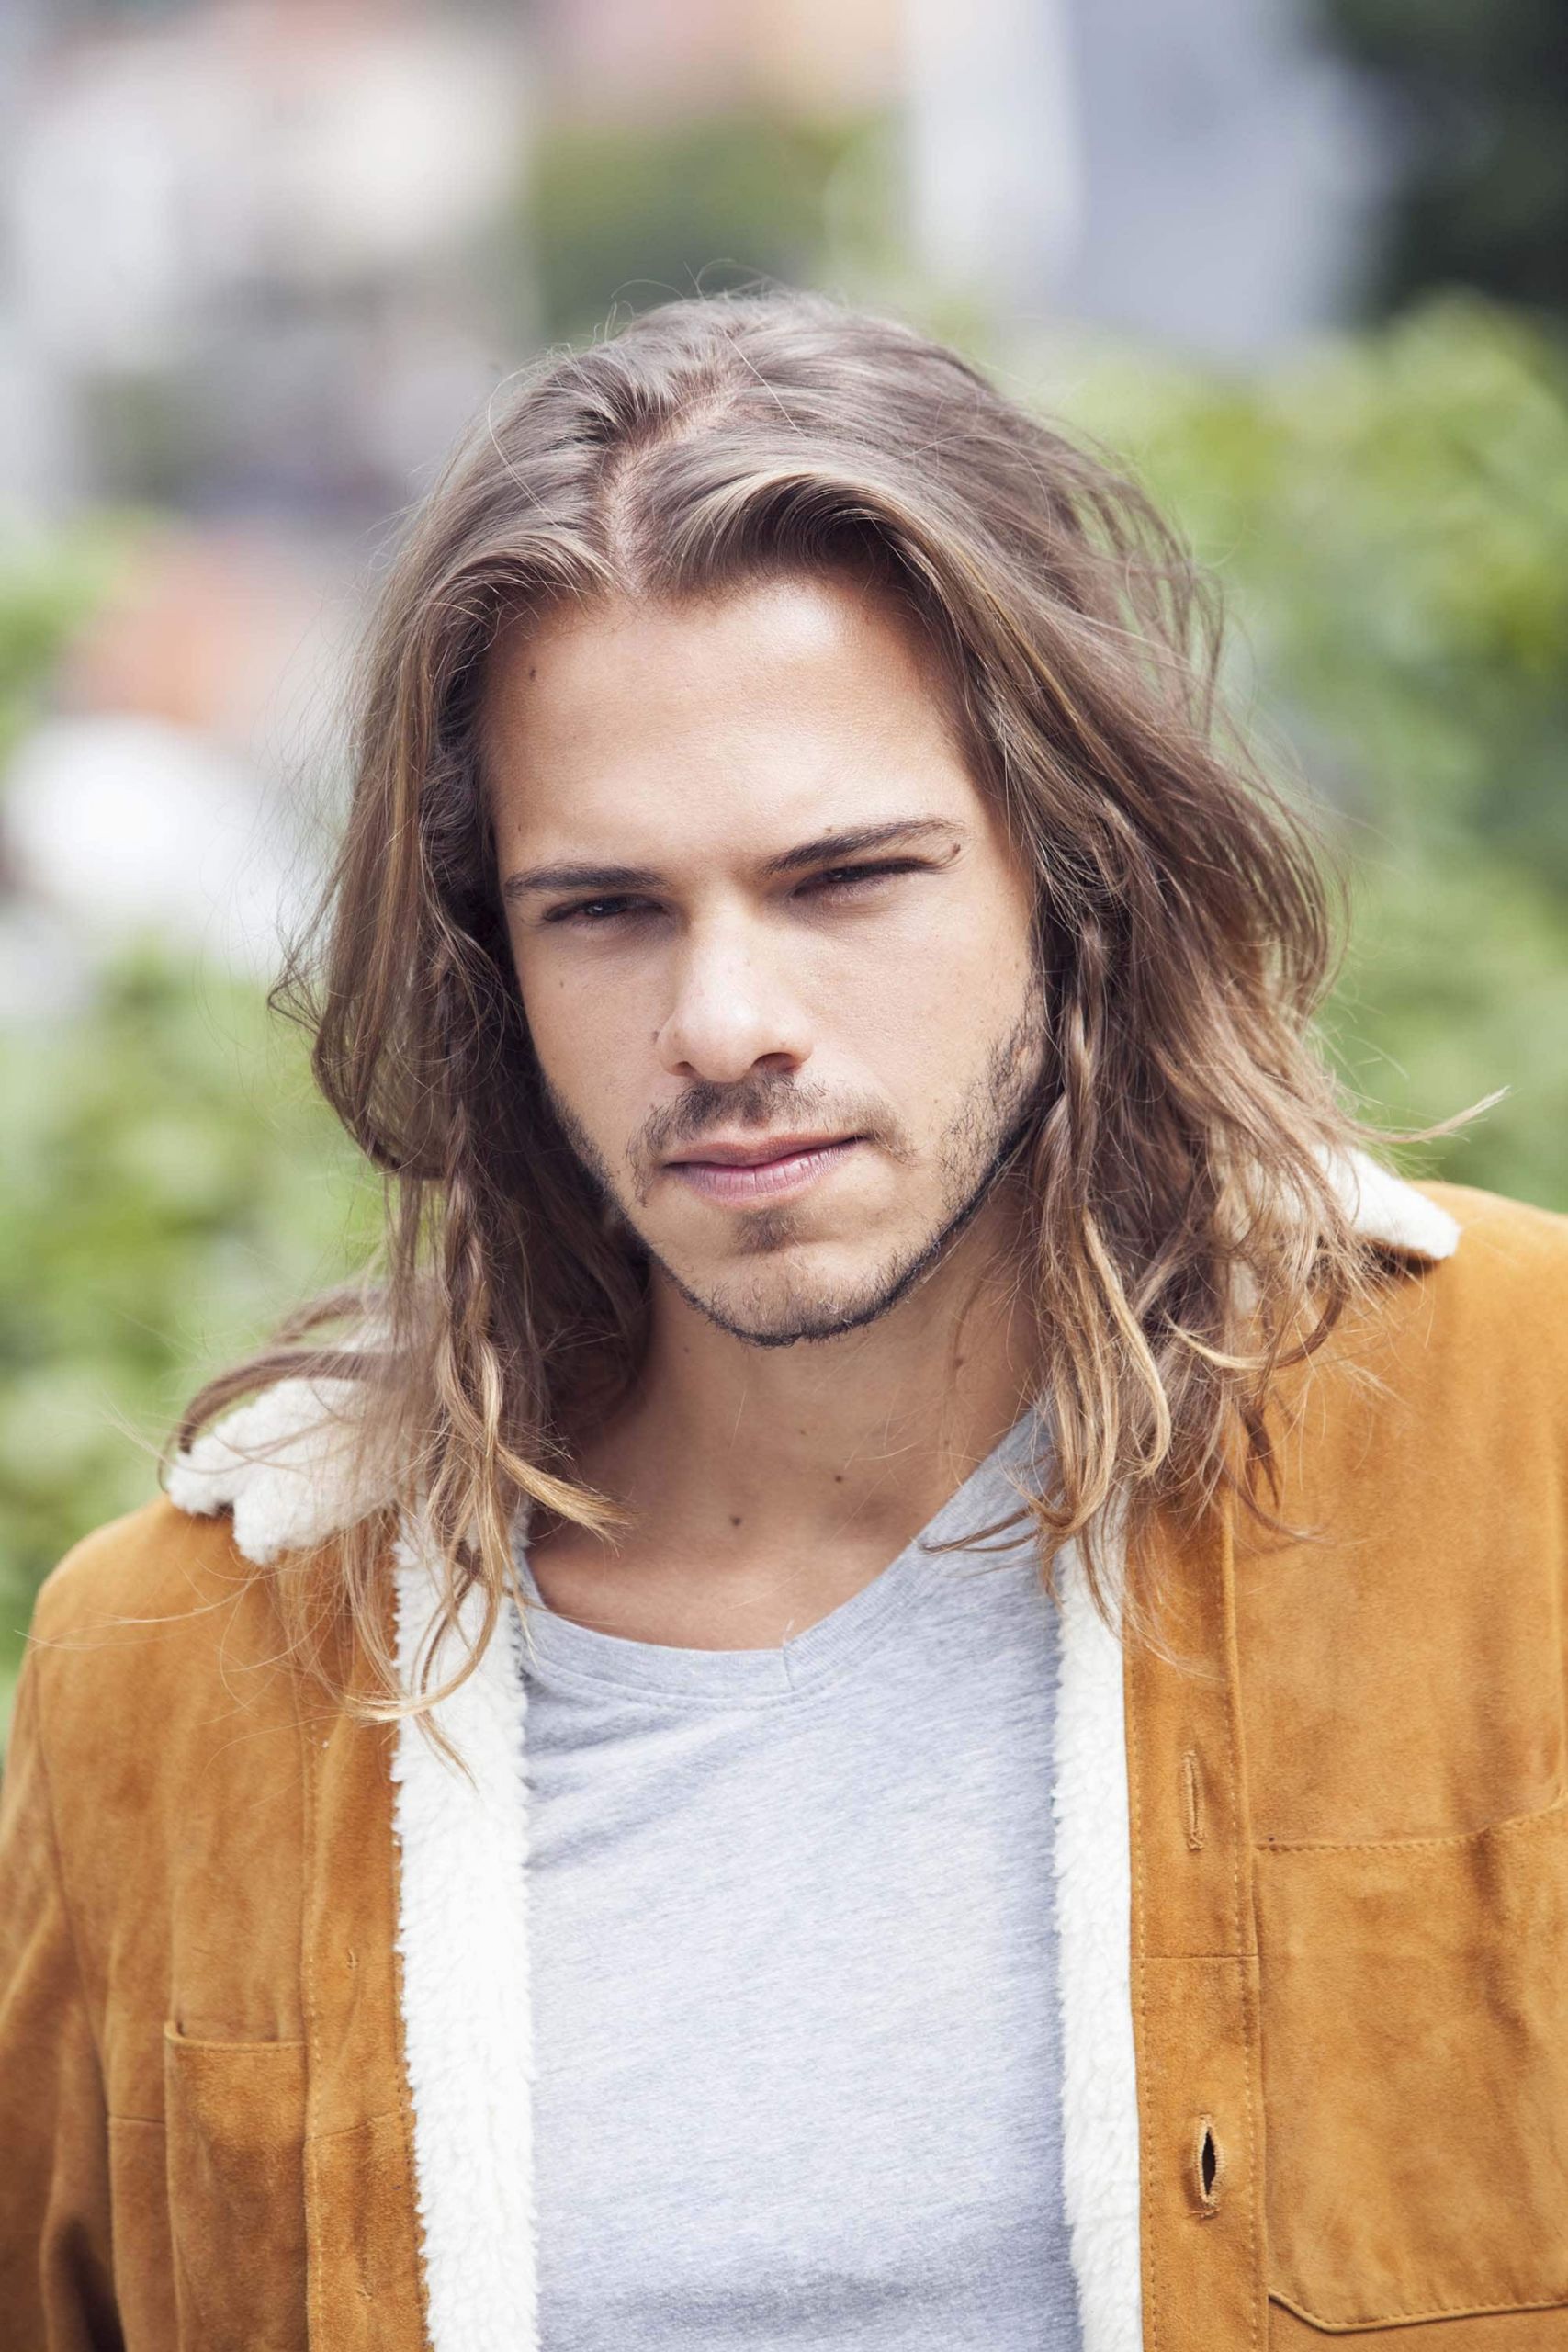 Mens Hairstyles Long
 Edgy long hairstyles men can pull off